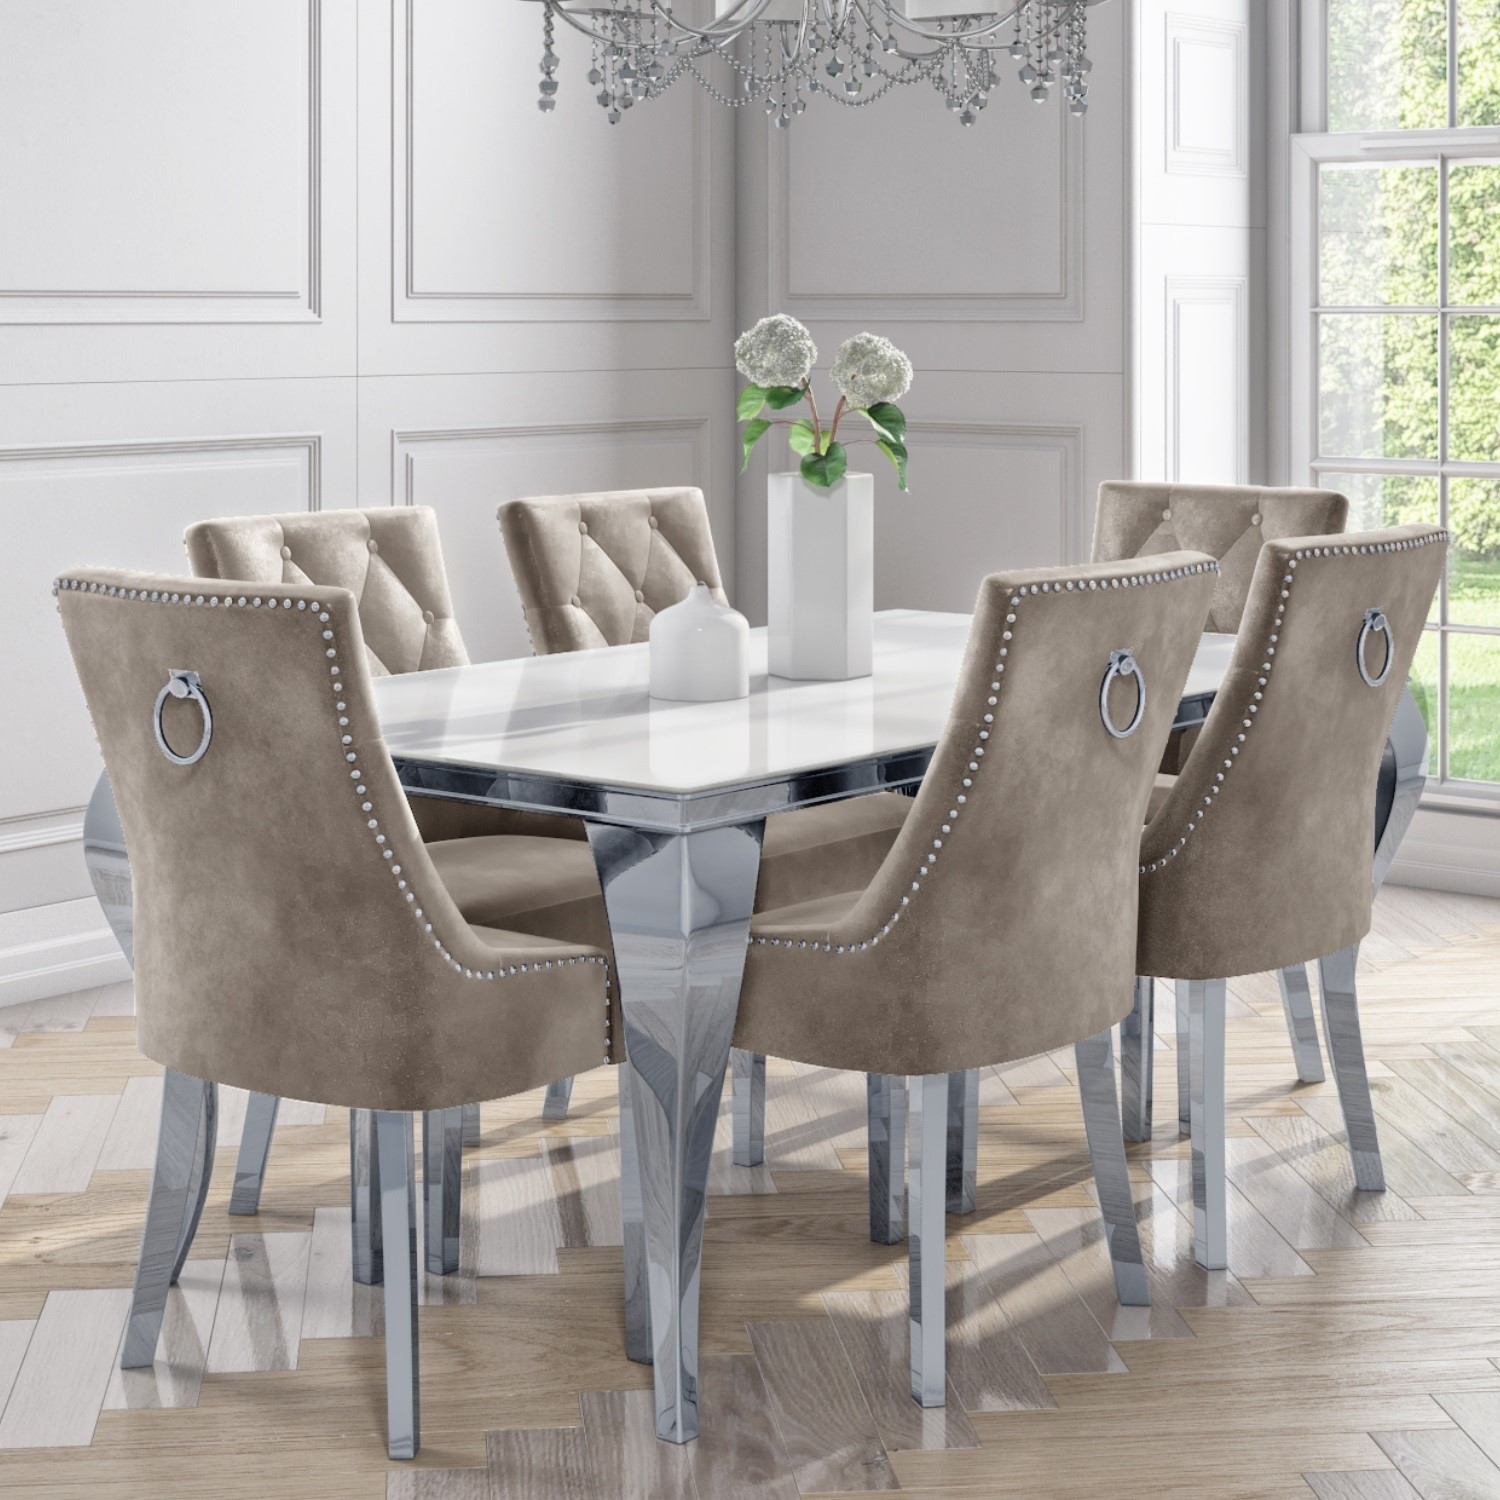 6 Seater Dining Set With White And Mirrored Table And Mink Velvet